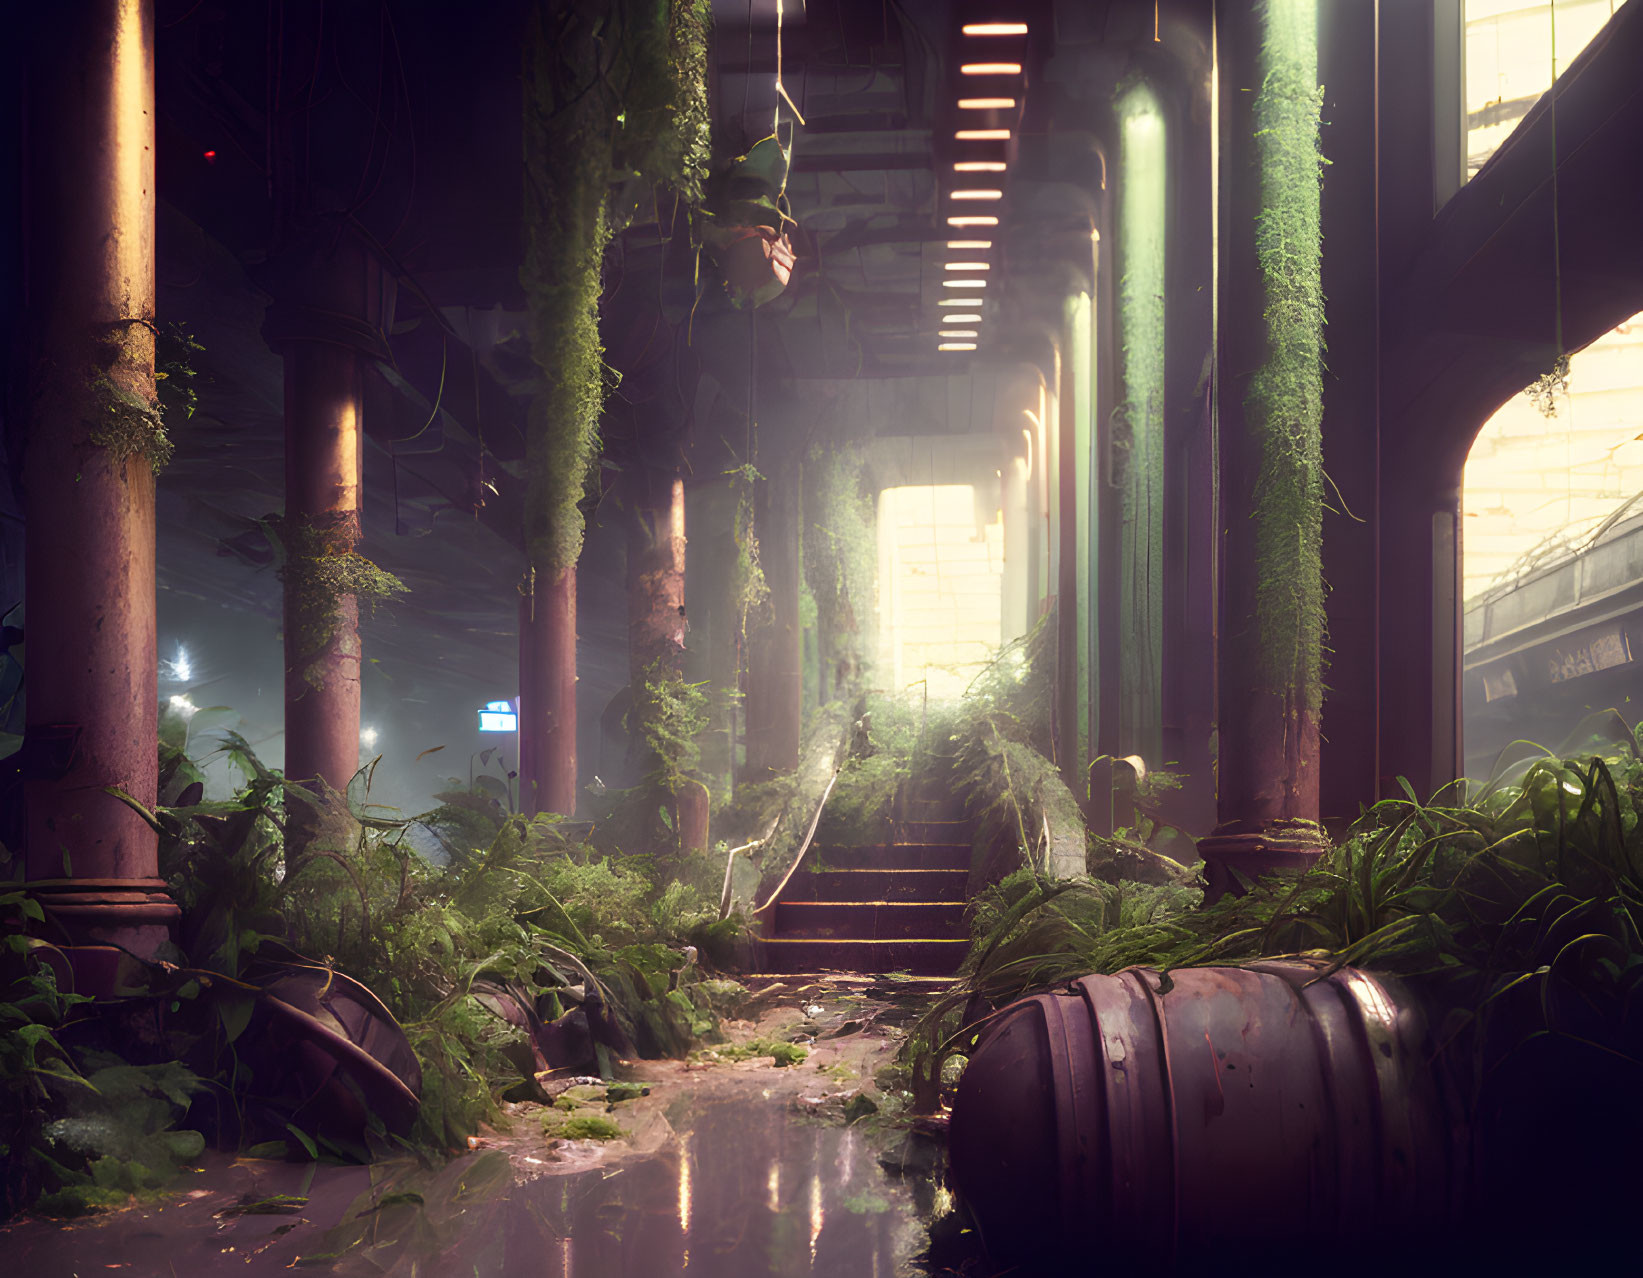 Abandoned industrial interior with sunlight, green foliage, and debris